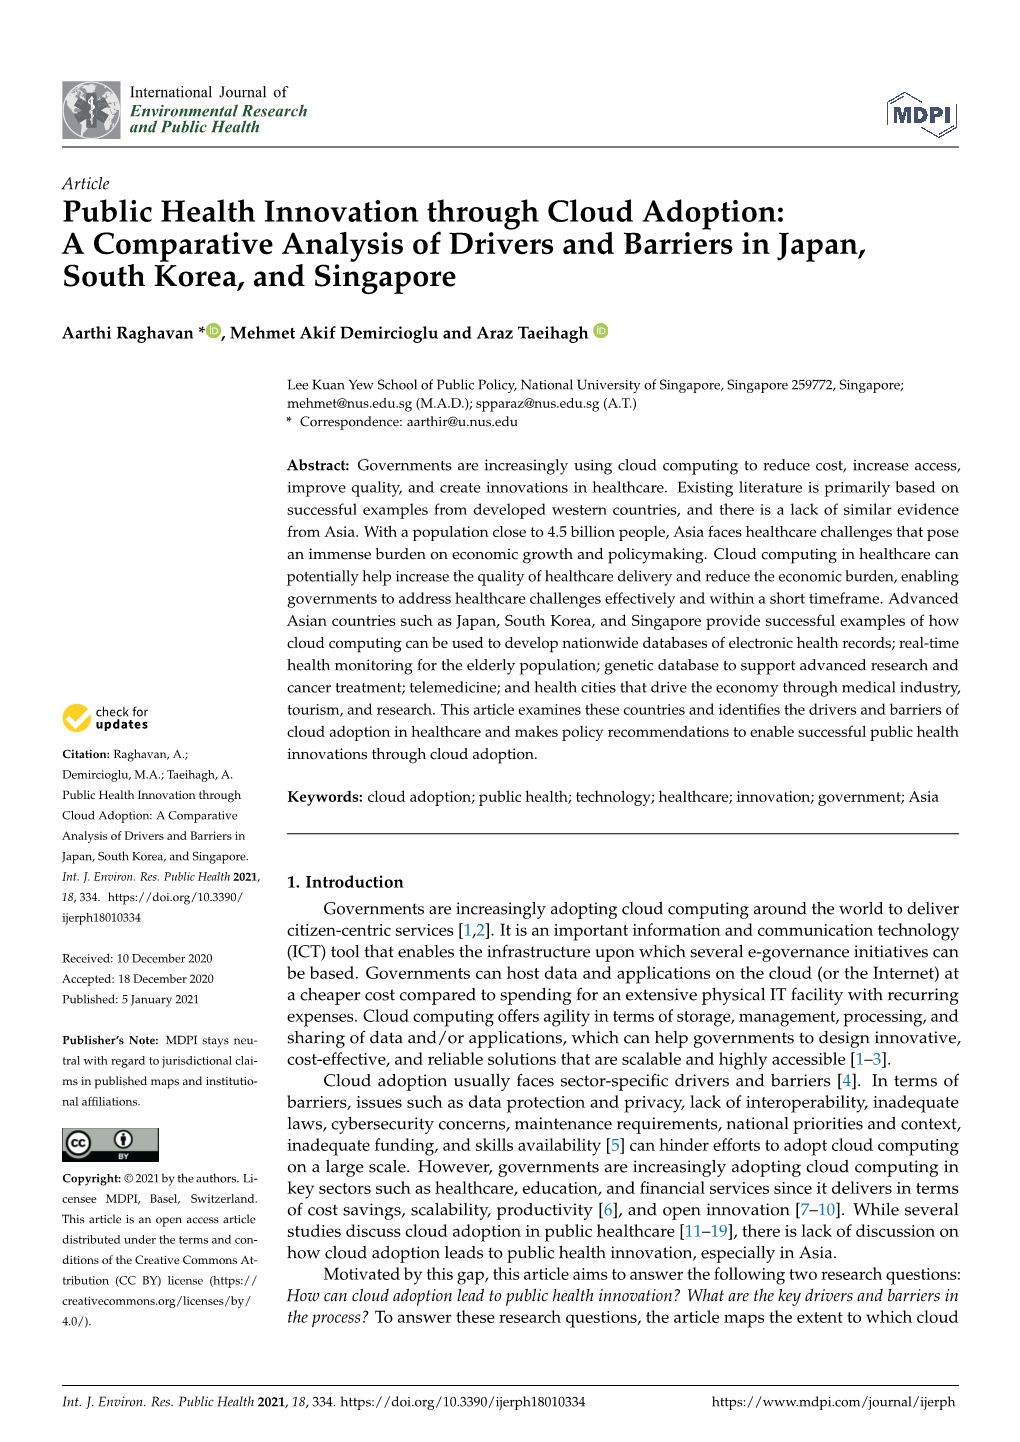 Public Health Innovation Through Cloud Adoption: a Comparative Analysis of Drivers and Barriers in Japan, South Korea, and Singapore